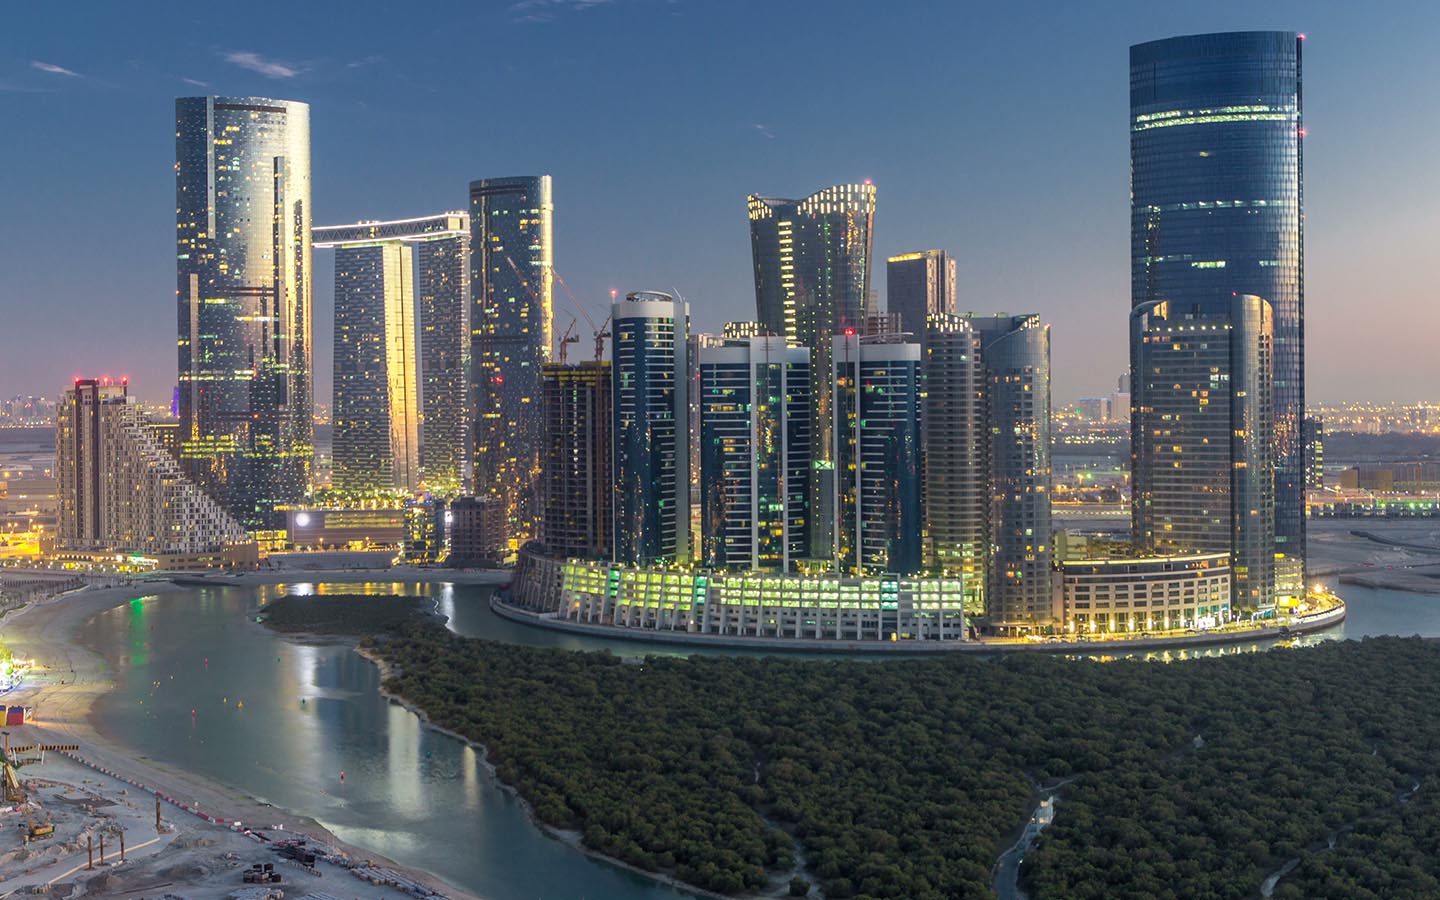 al reem island is a famous place in abu dhabi